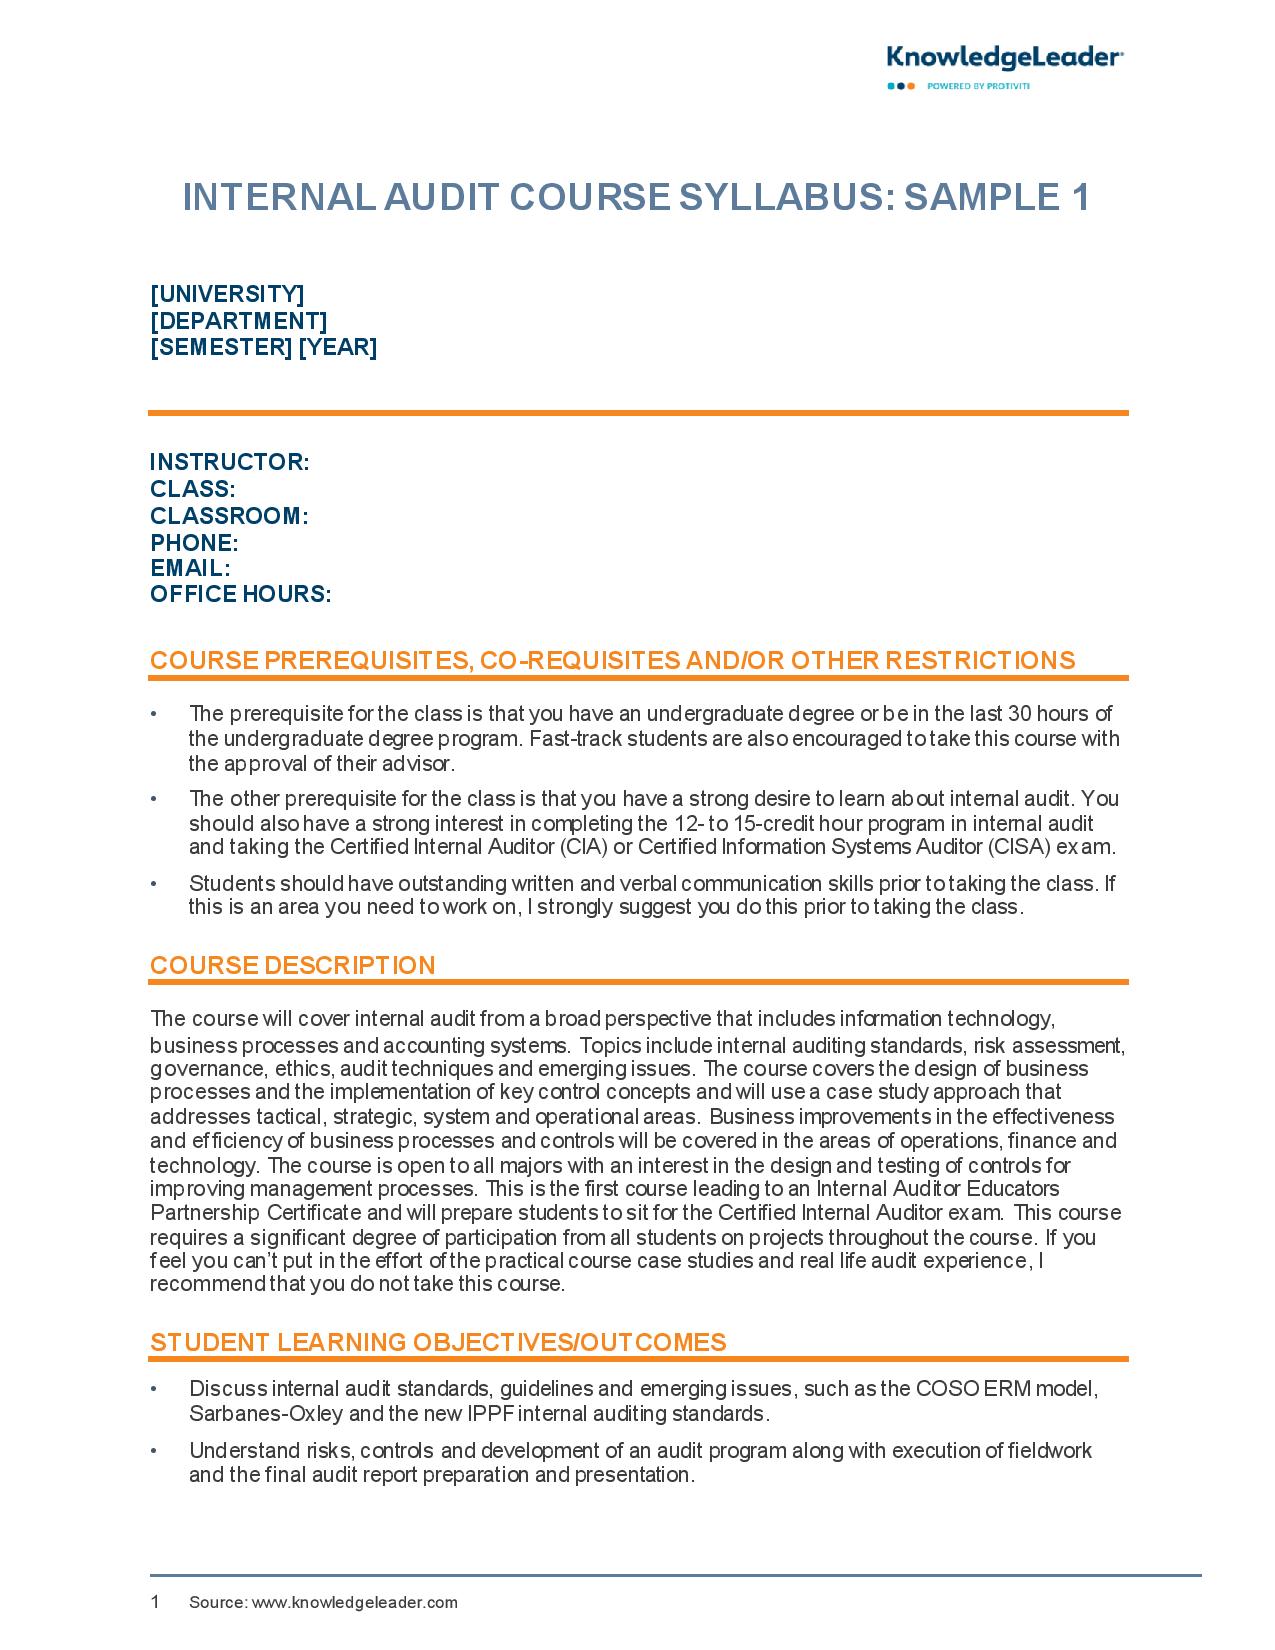 Screenshot of the first page of Internal Audit Course Syllabus Sample 1